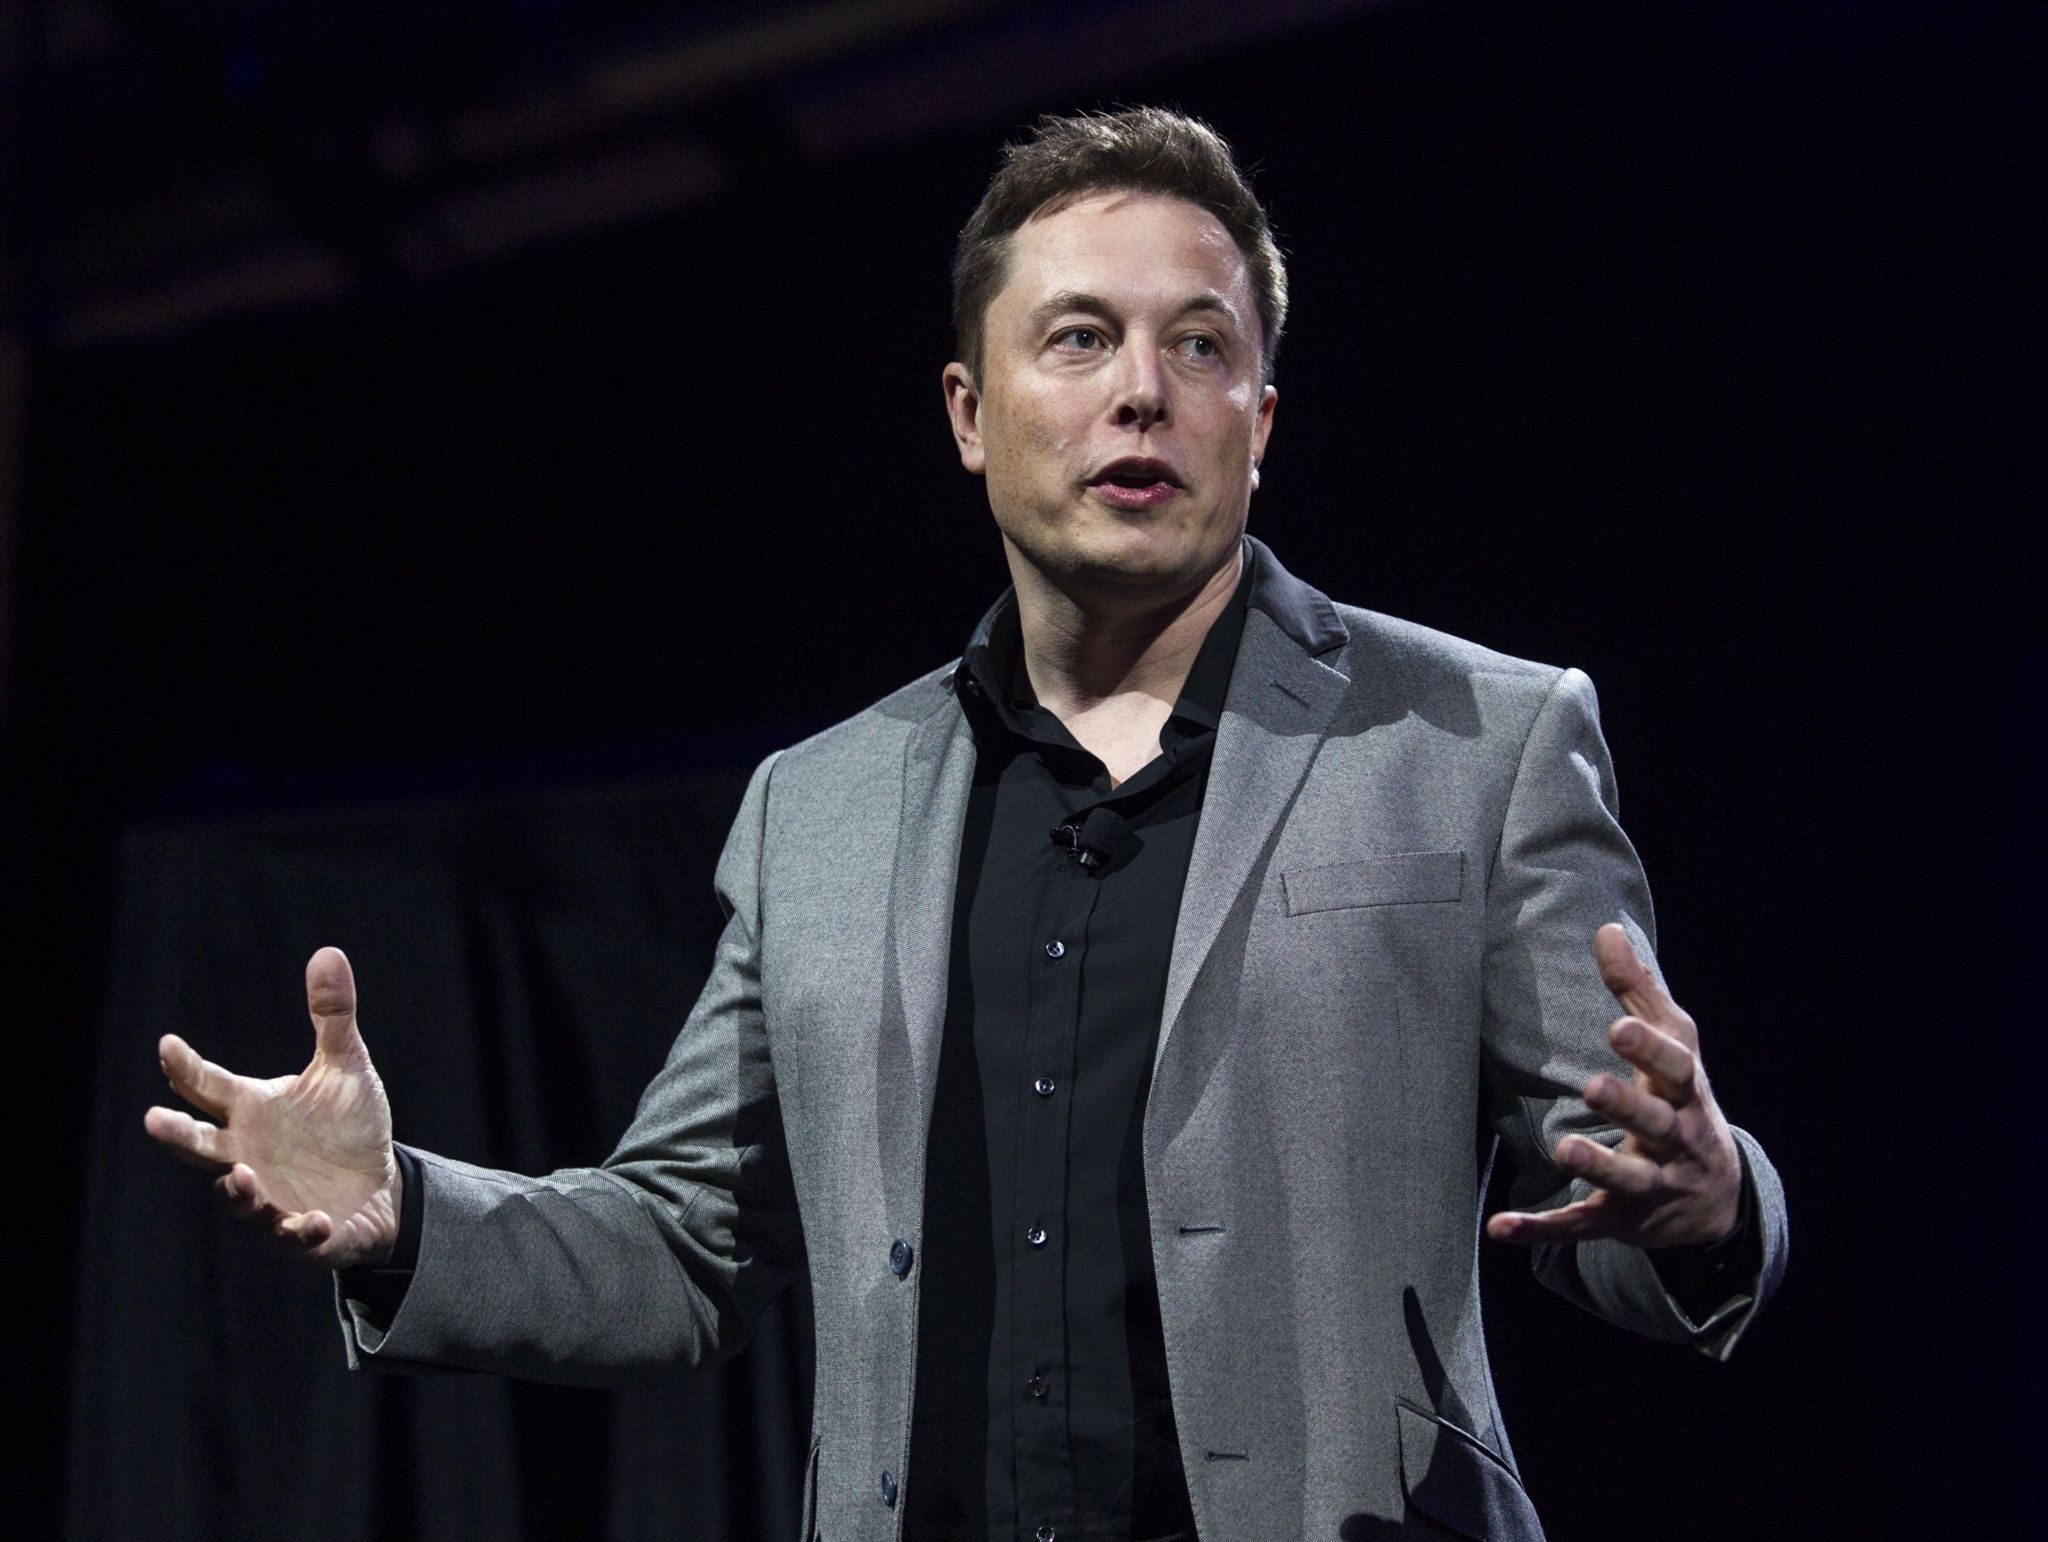 Tesla Motors CEO Elon Musk unveils the company's newest products, in Hawthorne, California; 30 April 2015